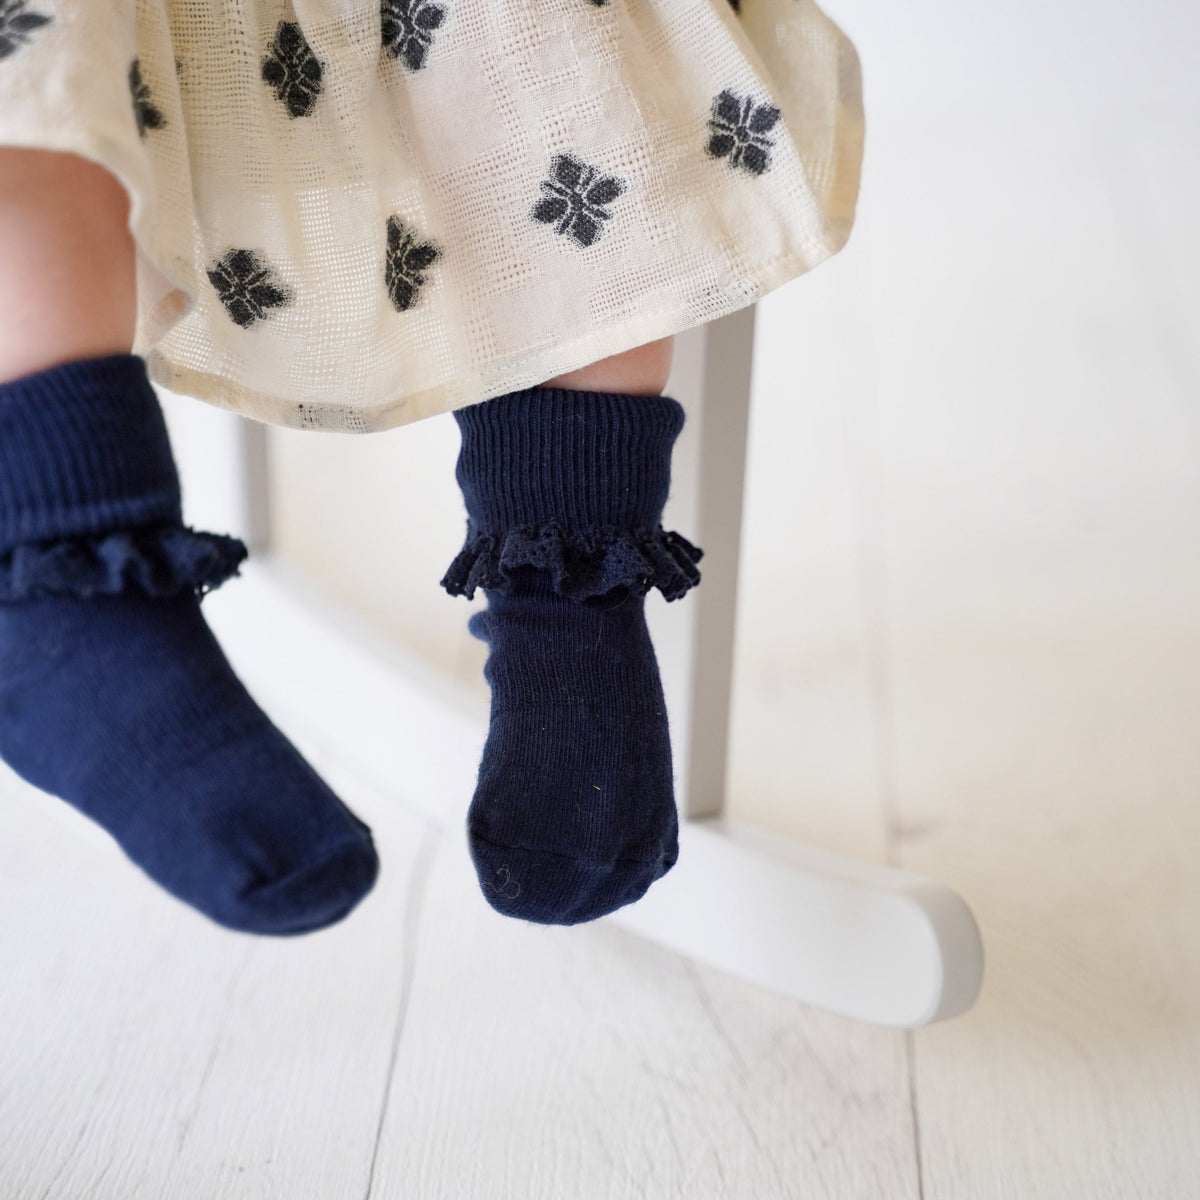 Frilly Non-Slip Stay-On Baby and Toddler Socks - 3 Pack in Plain Navy